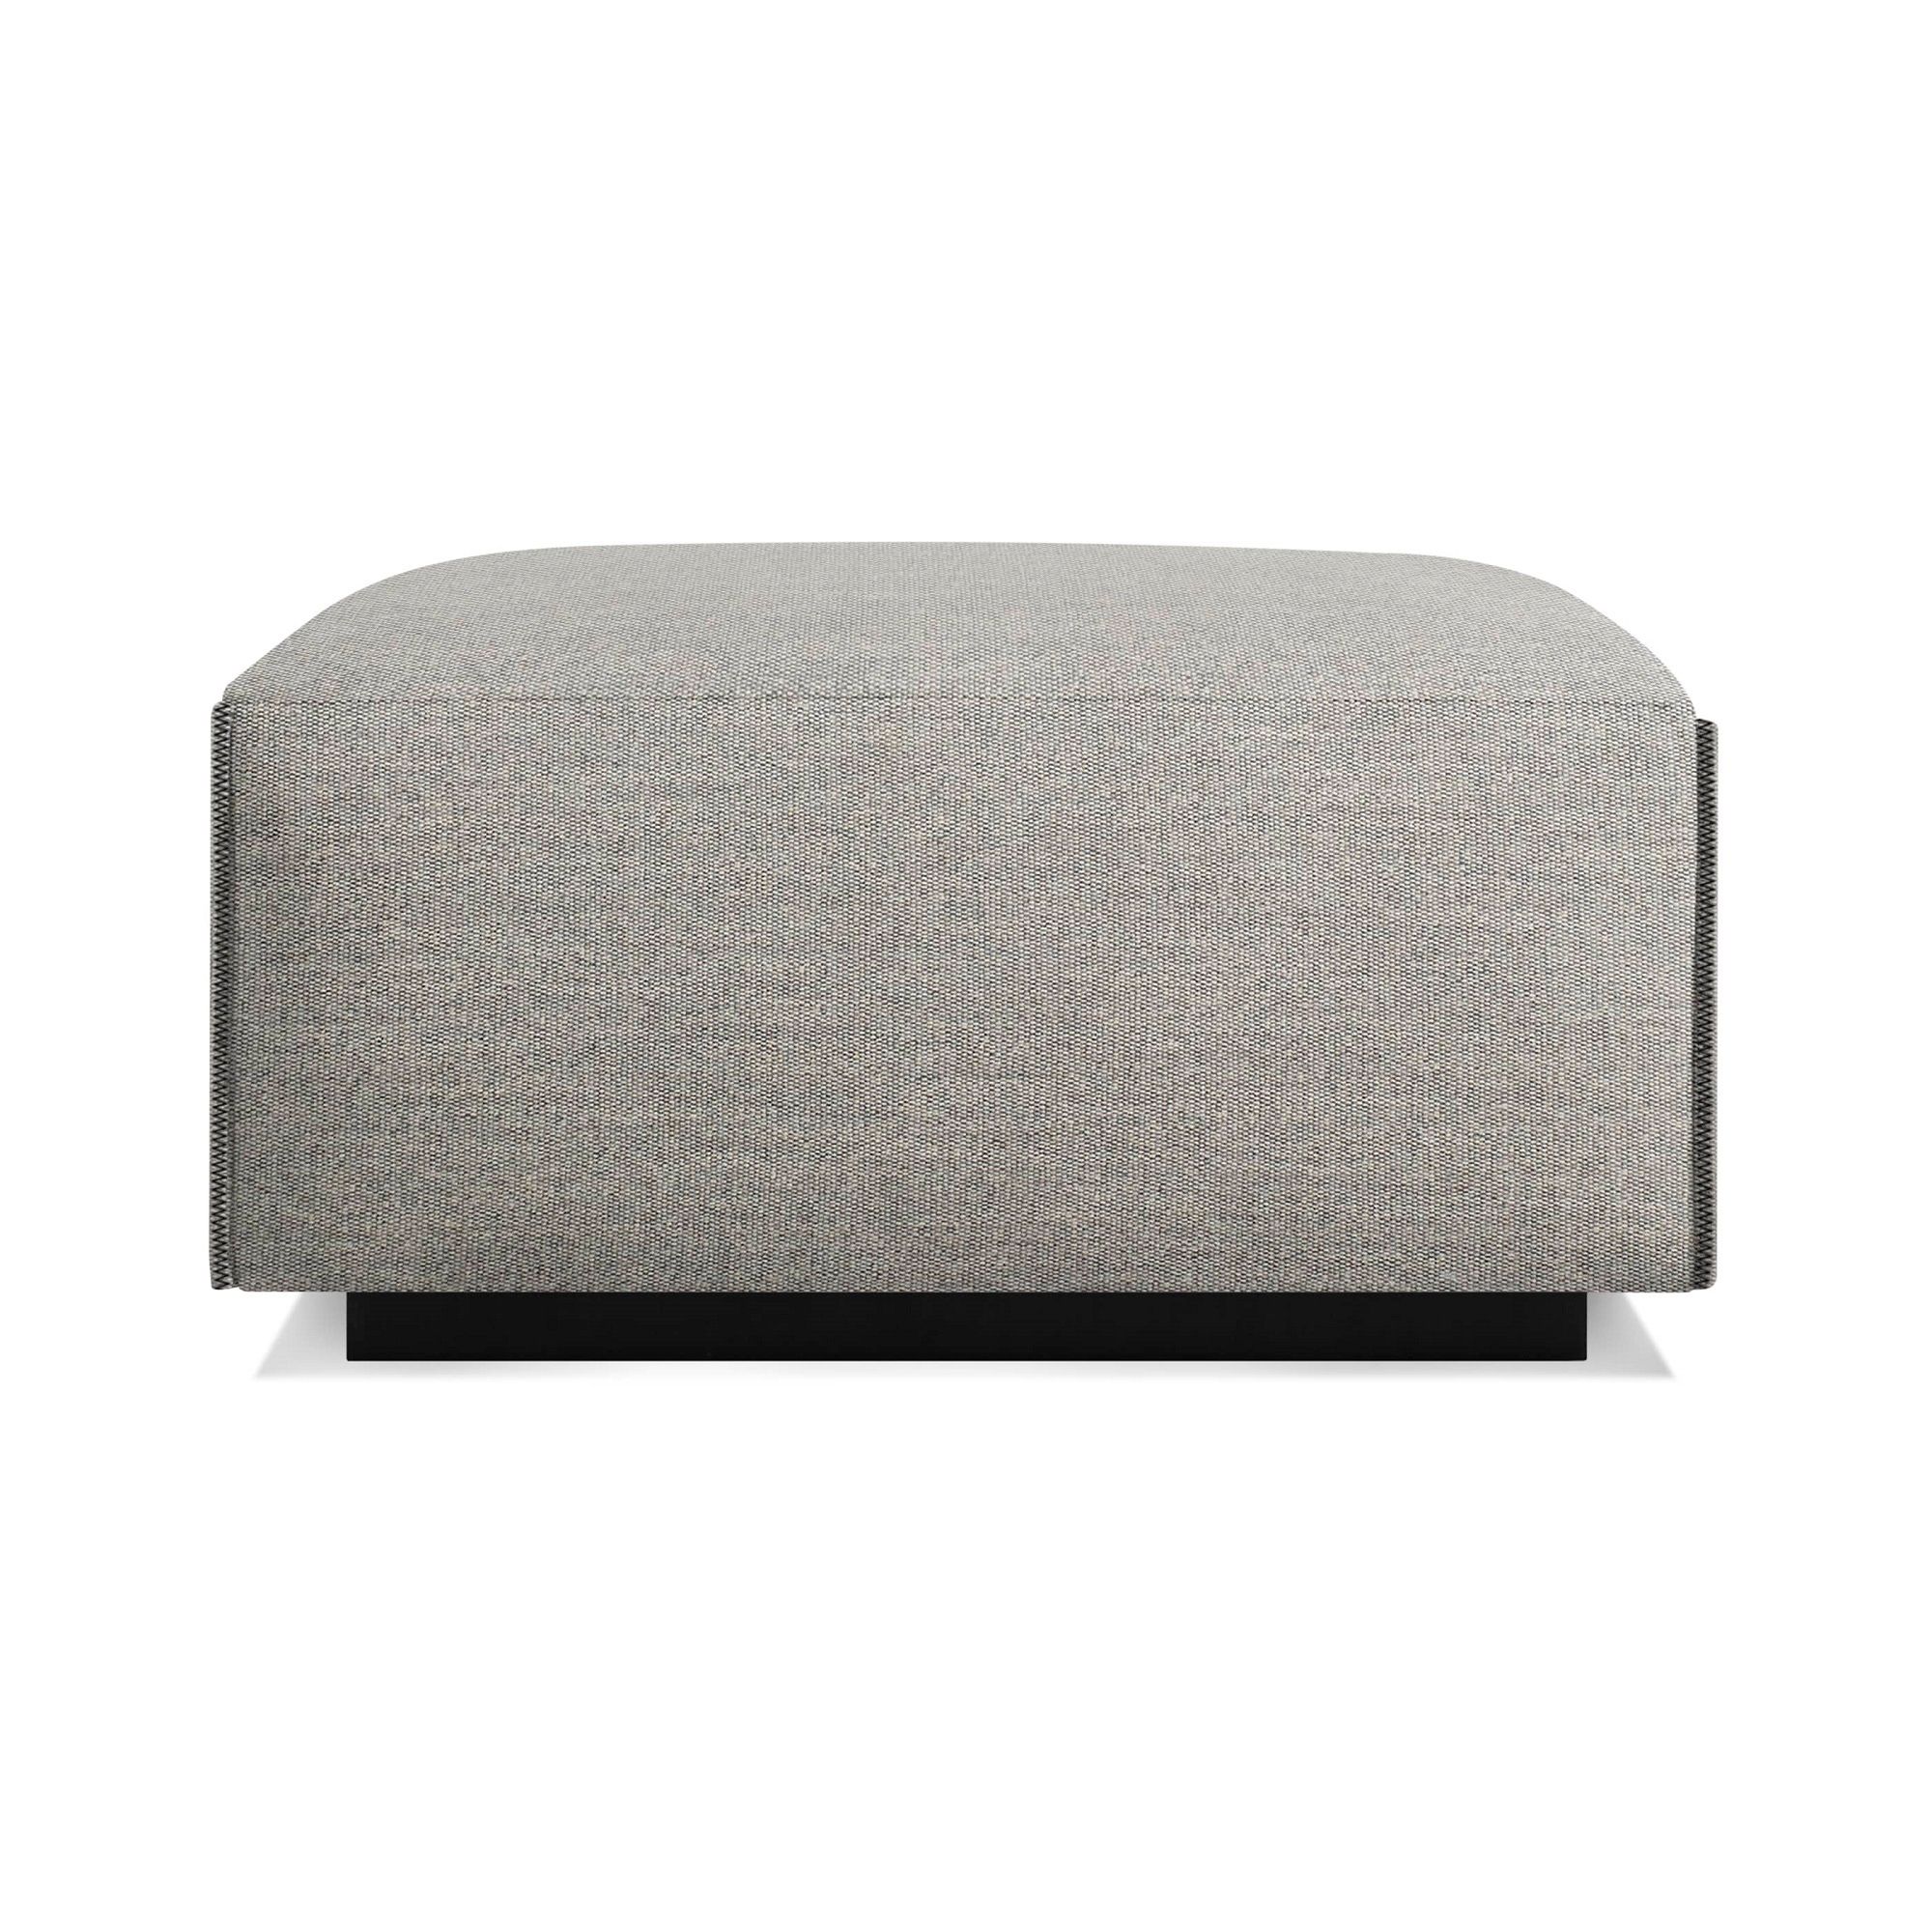 Blu Dot Cleon Ottoman Pertaining To Charcoal Dot Ottomans (View 1 of 15)